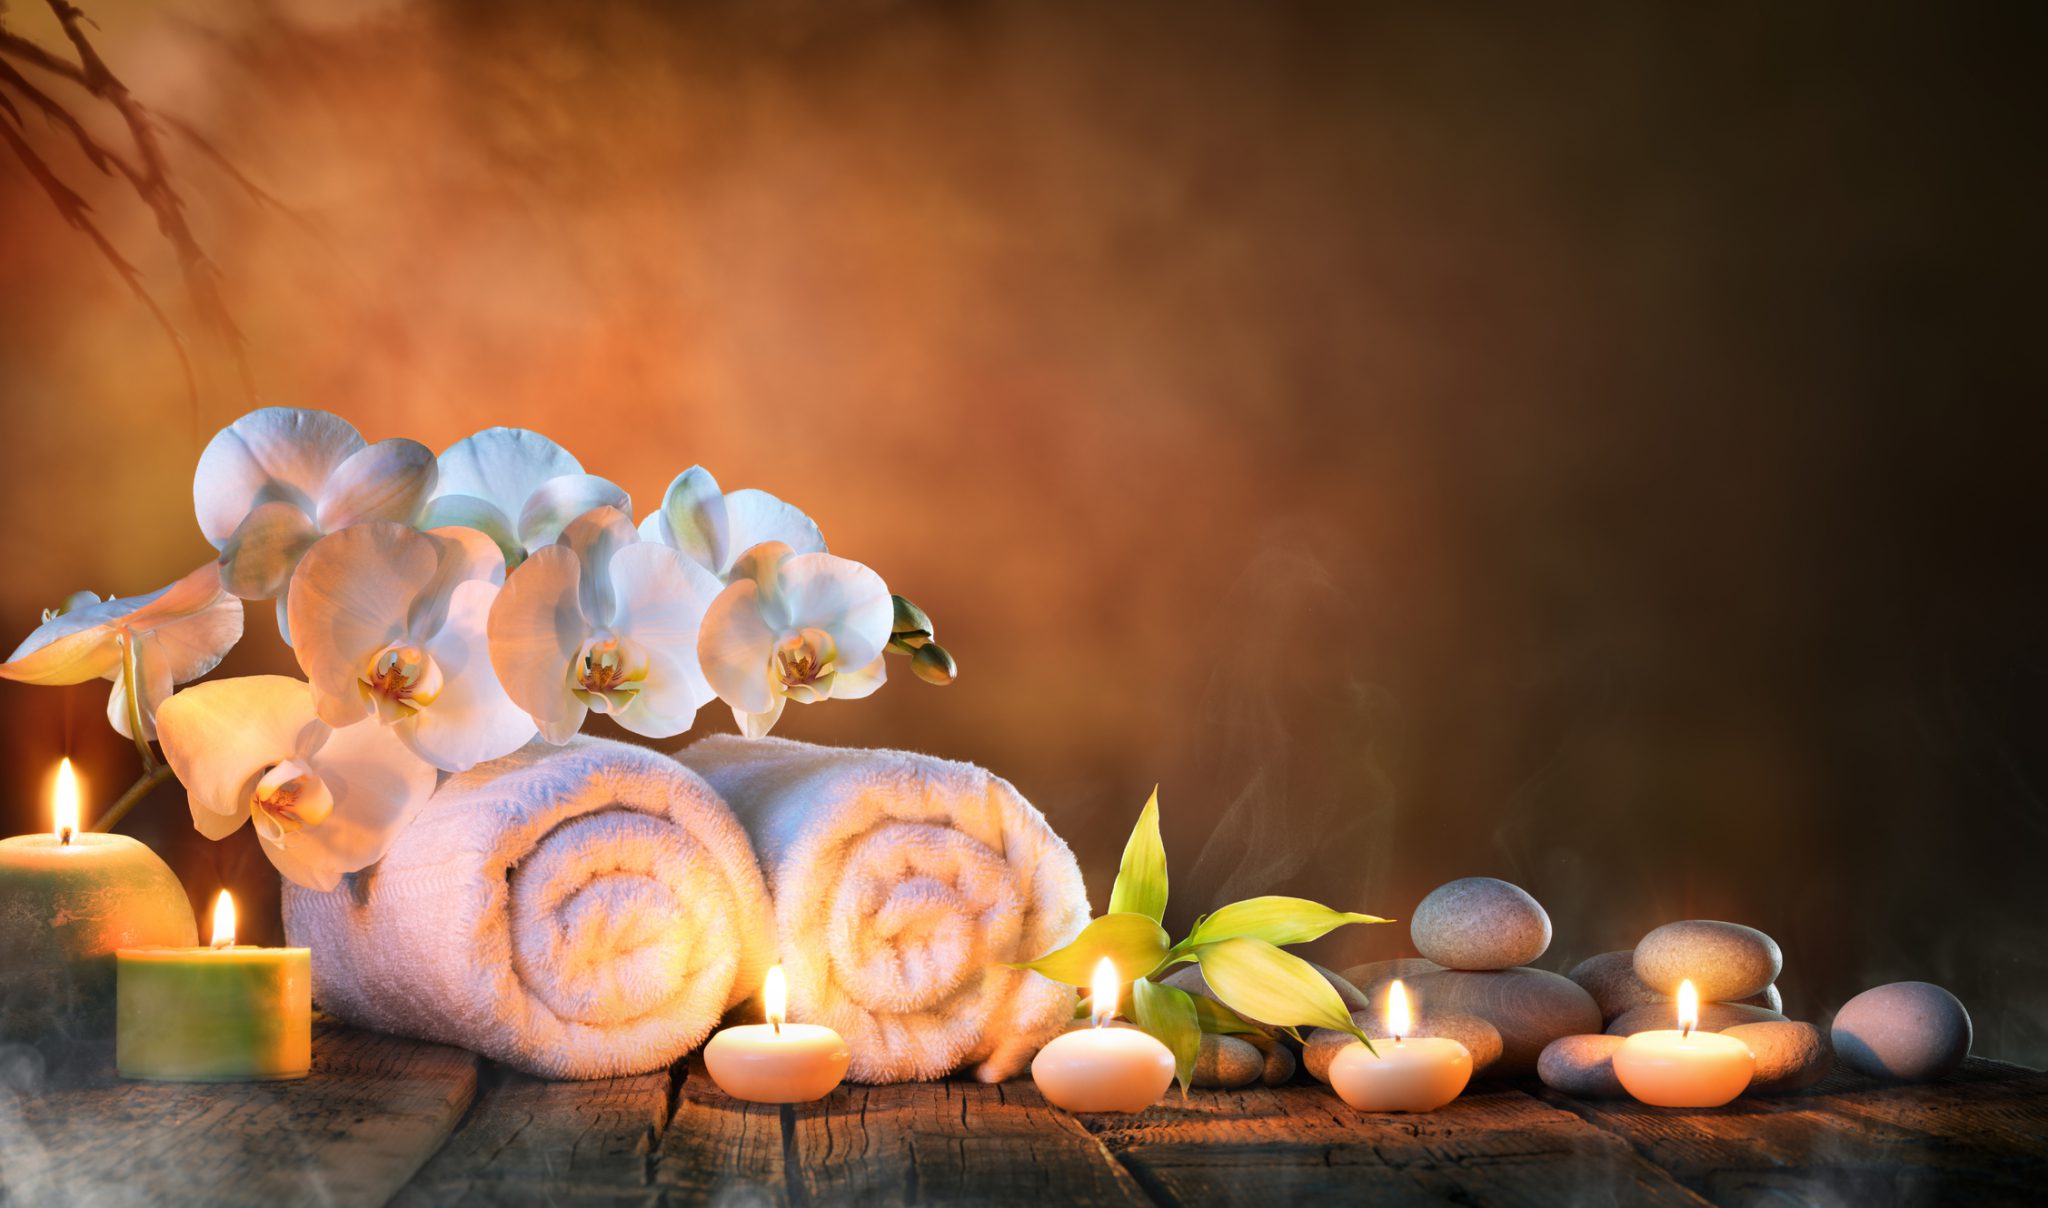 White flowers, rolled up towels, hot stones, and lit candles.